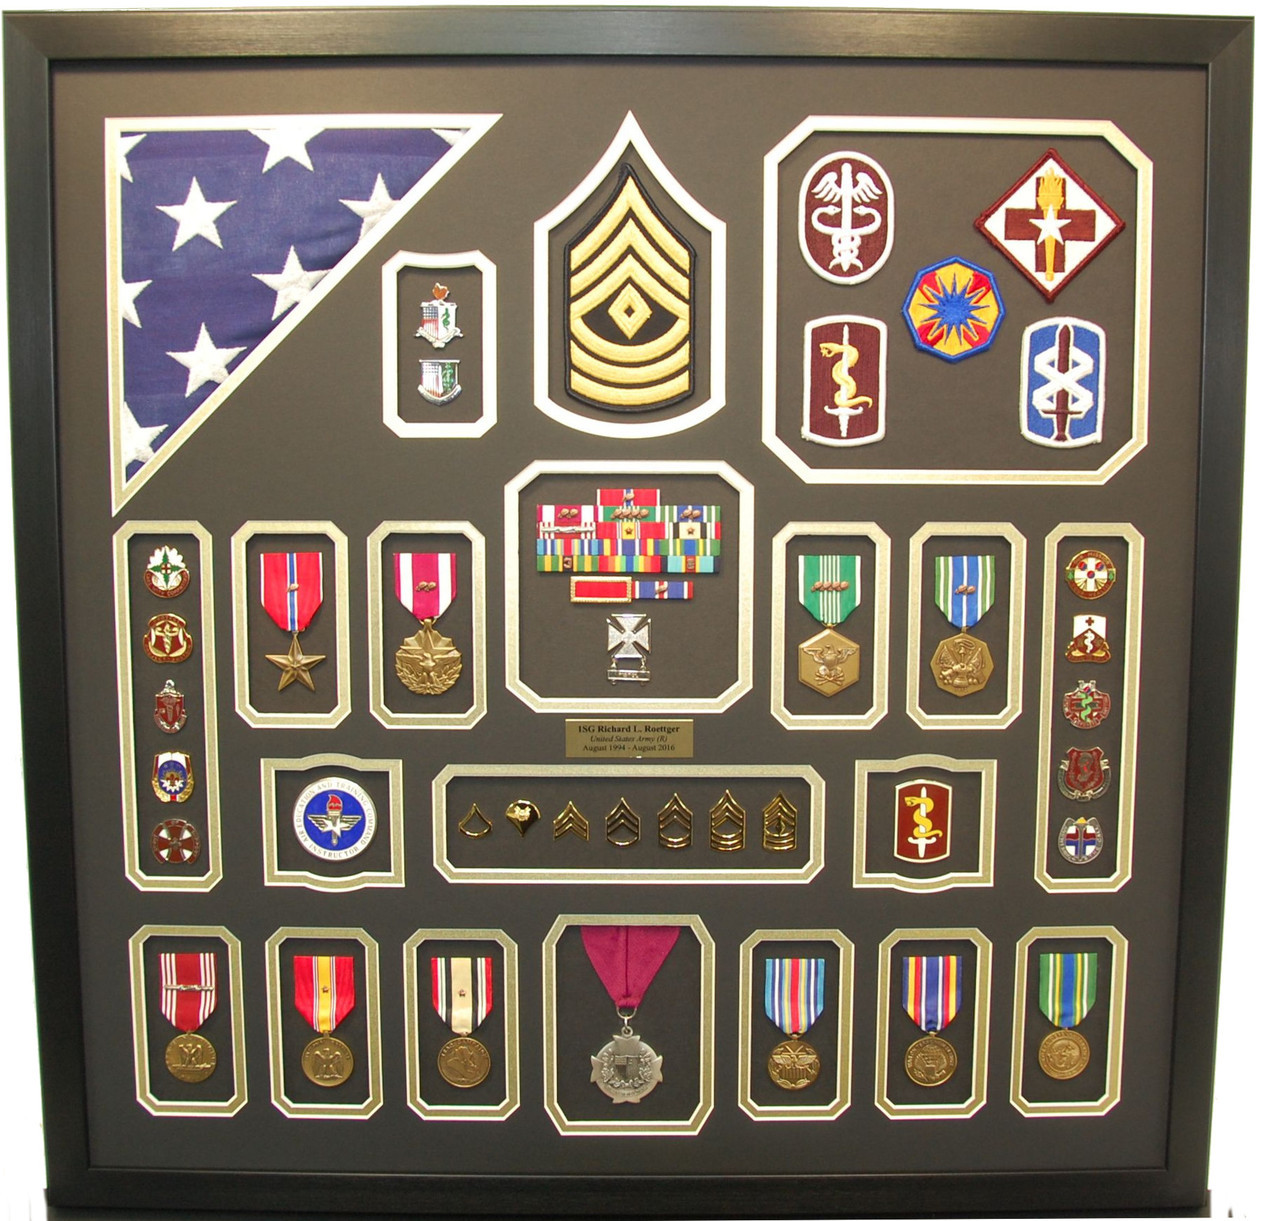 U S Army Retirement Shadow Box With Flag Military Memories And More